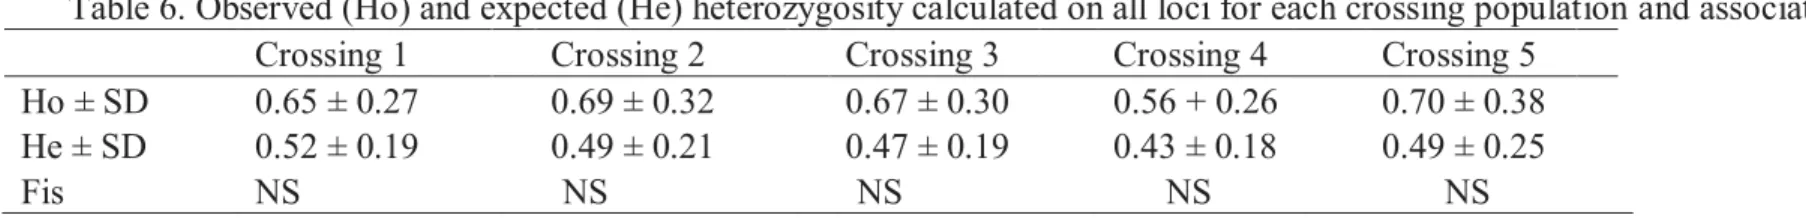 Table 6. Observed (Ho) and expected (He) heterozygosity calculated on all loci for each crossing population and associated Fis     Crossing 1     Crossing 2     Crossing 3     Crossing 4     Crossing 5    